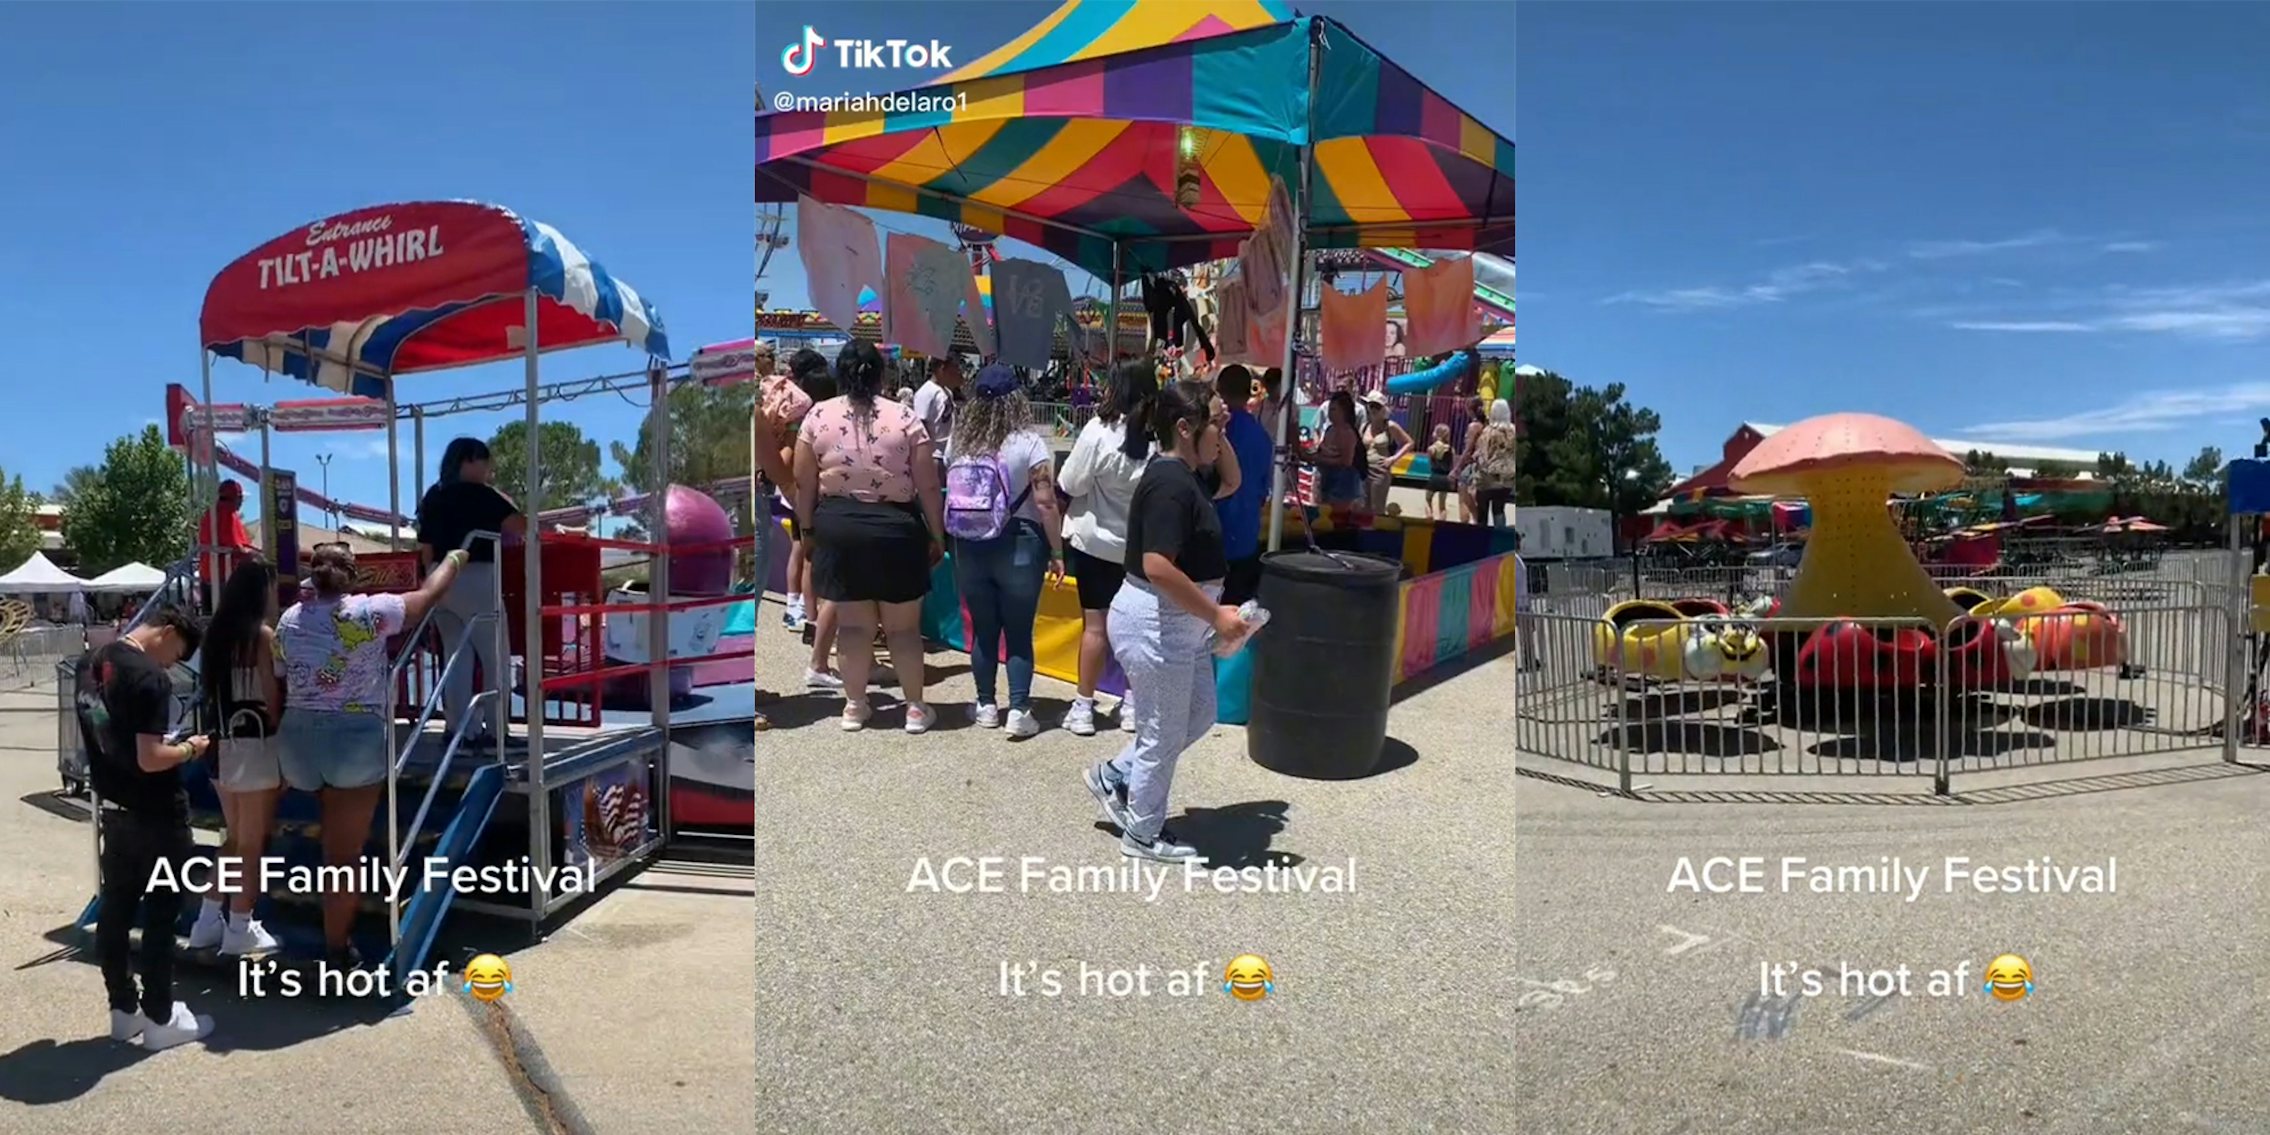 Carnival rides in a parking lot with caption 'ACE Family Festival, It's hot af'